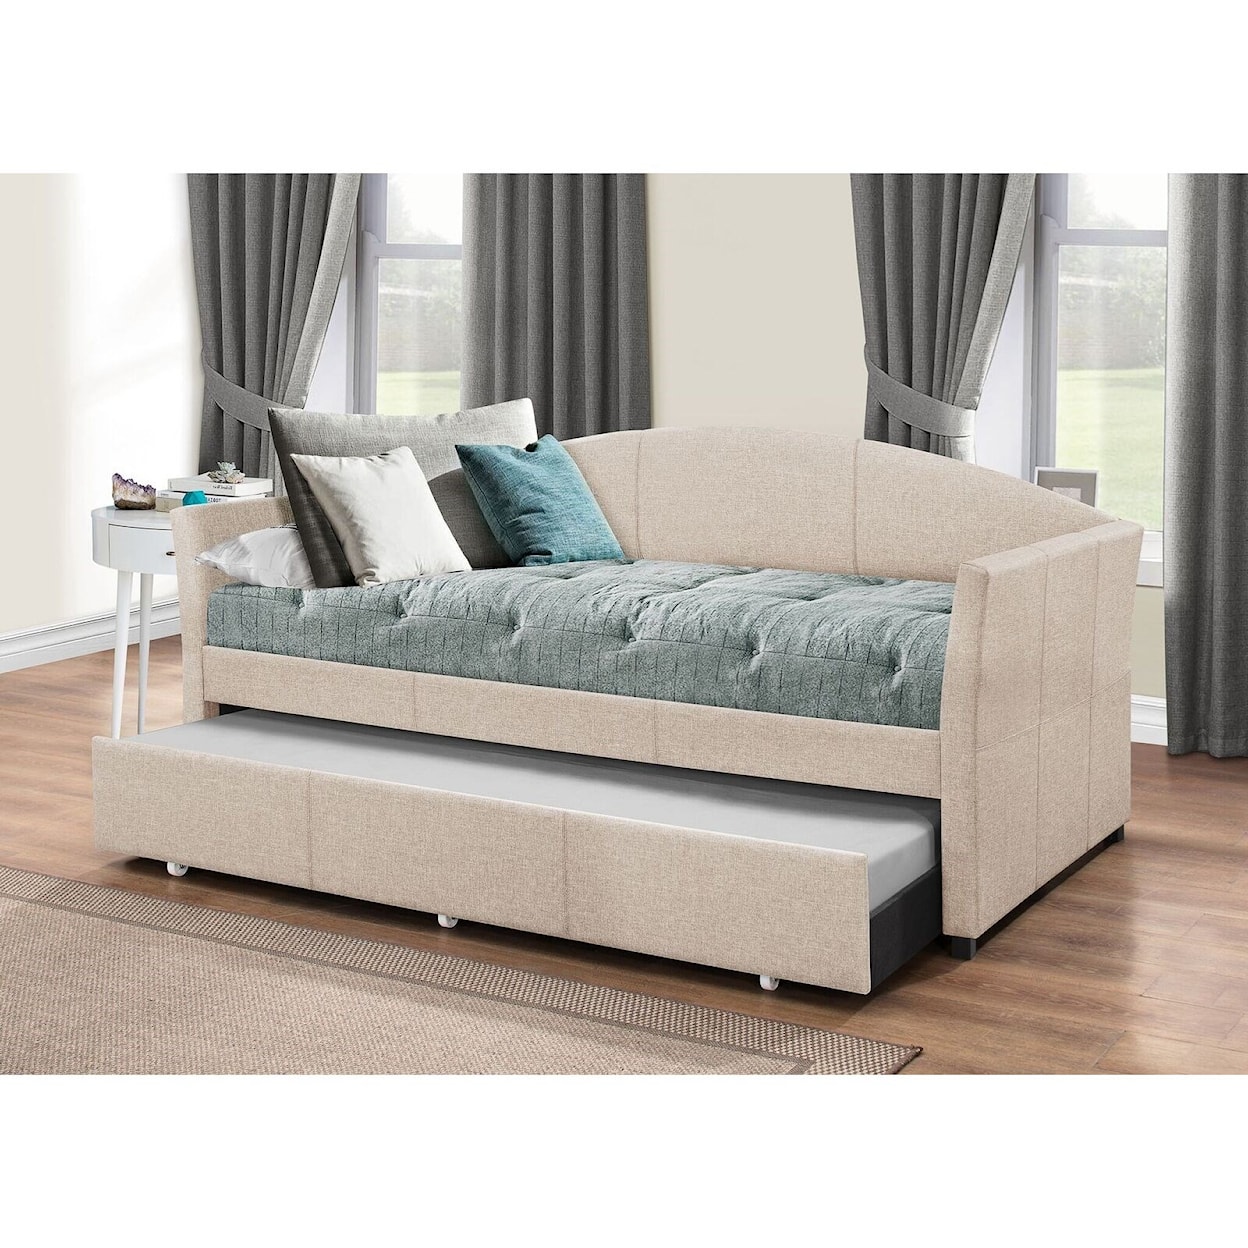 Hillsdale Daybeds Daybed Set